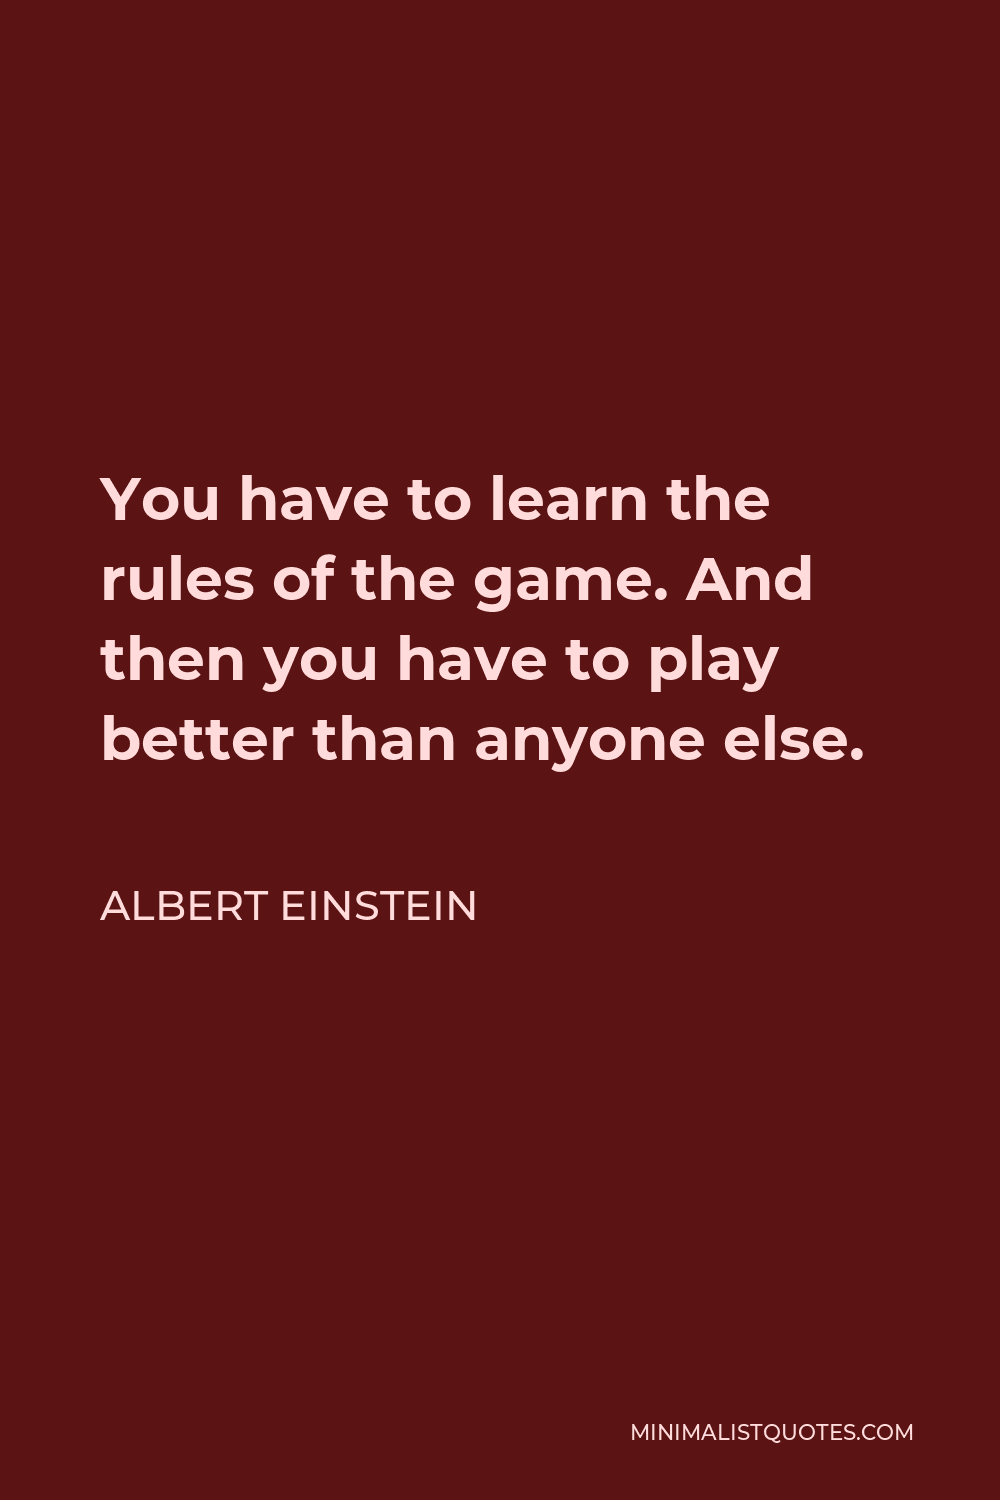 Albert Einstein Quote - You have to learn the rules of the game. And then you have to play better than anyone else.